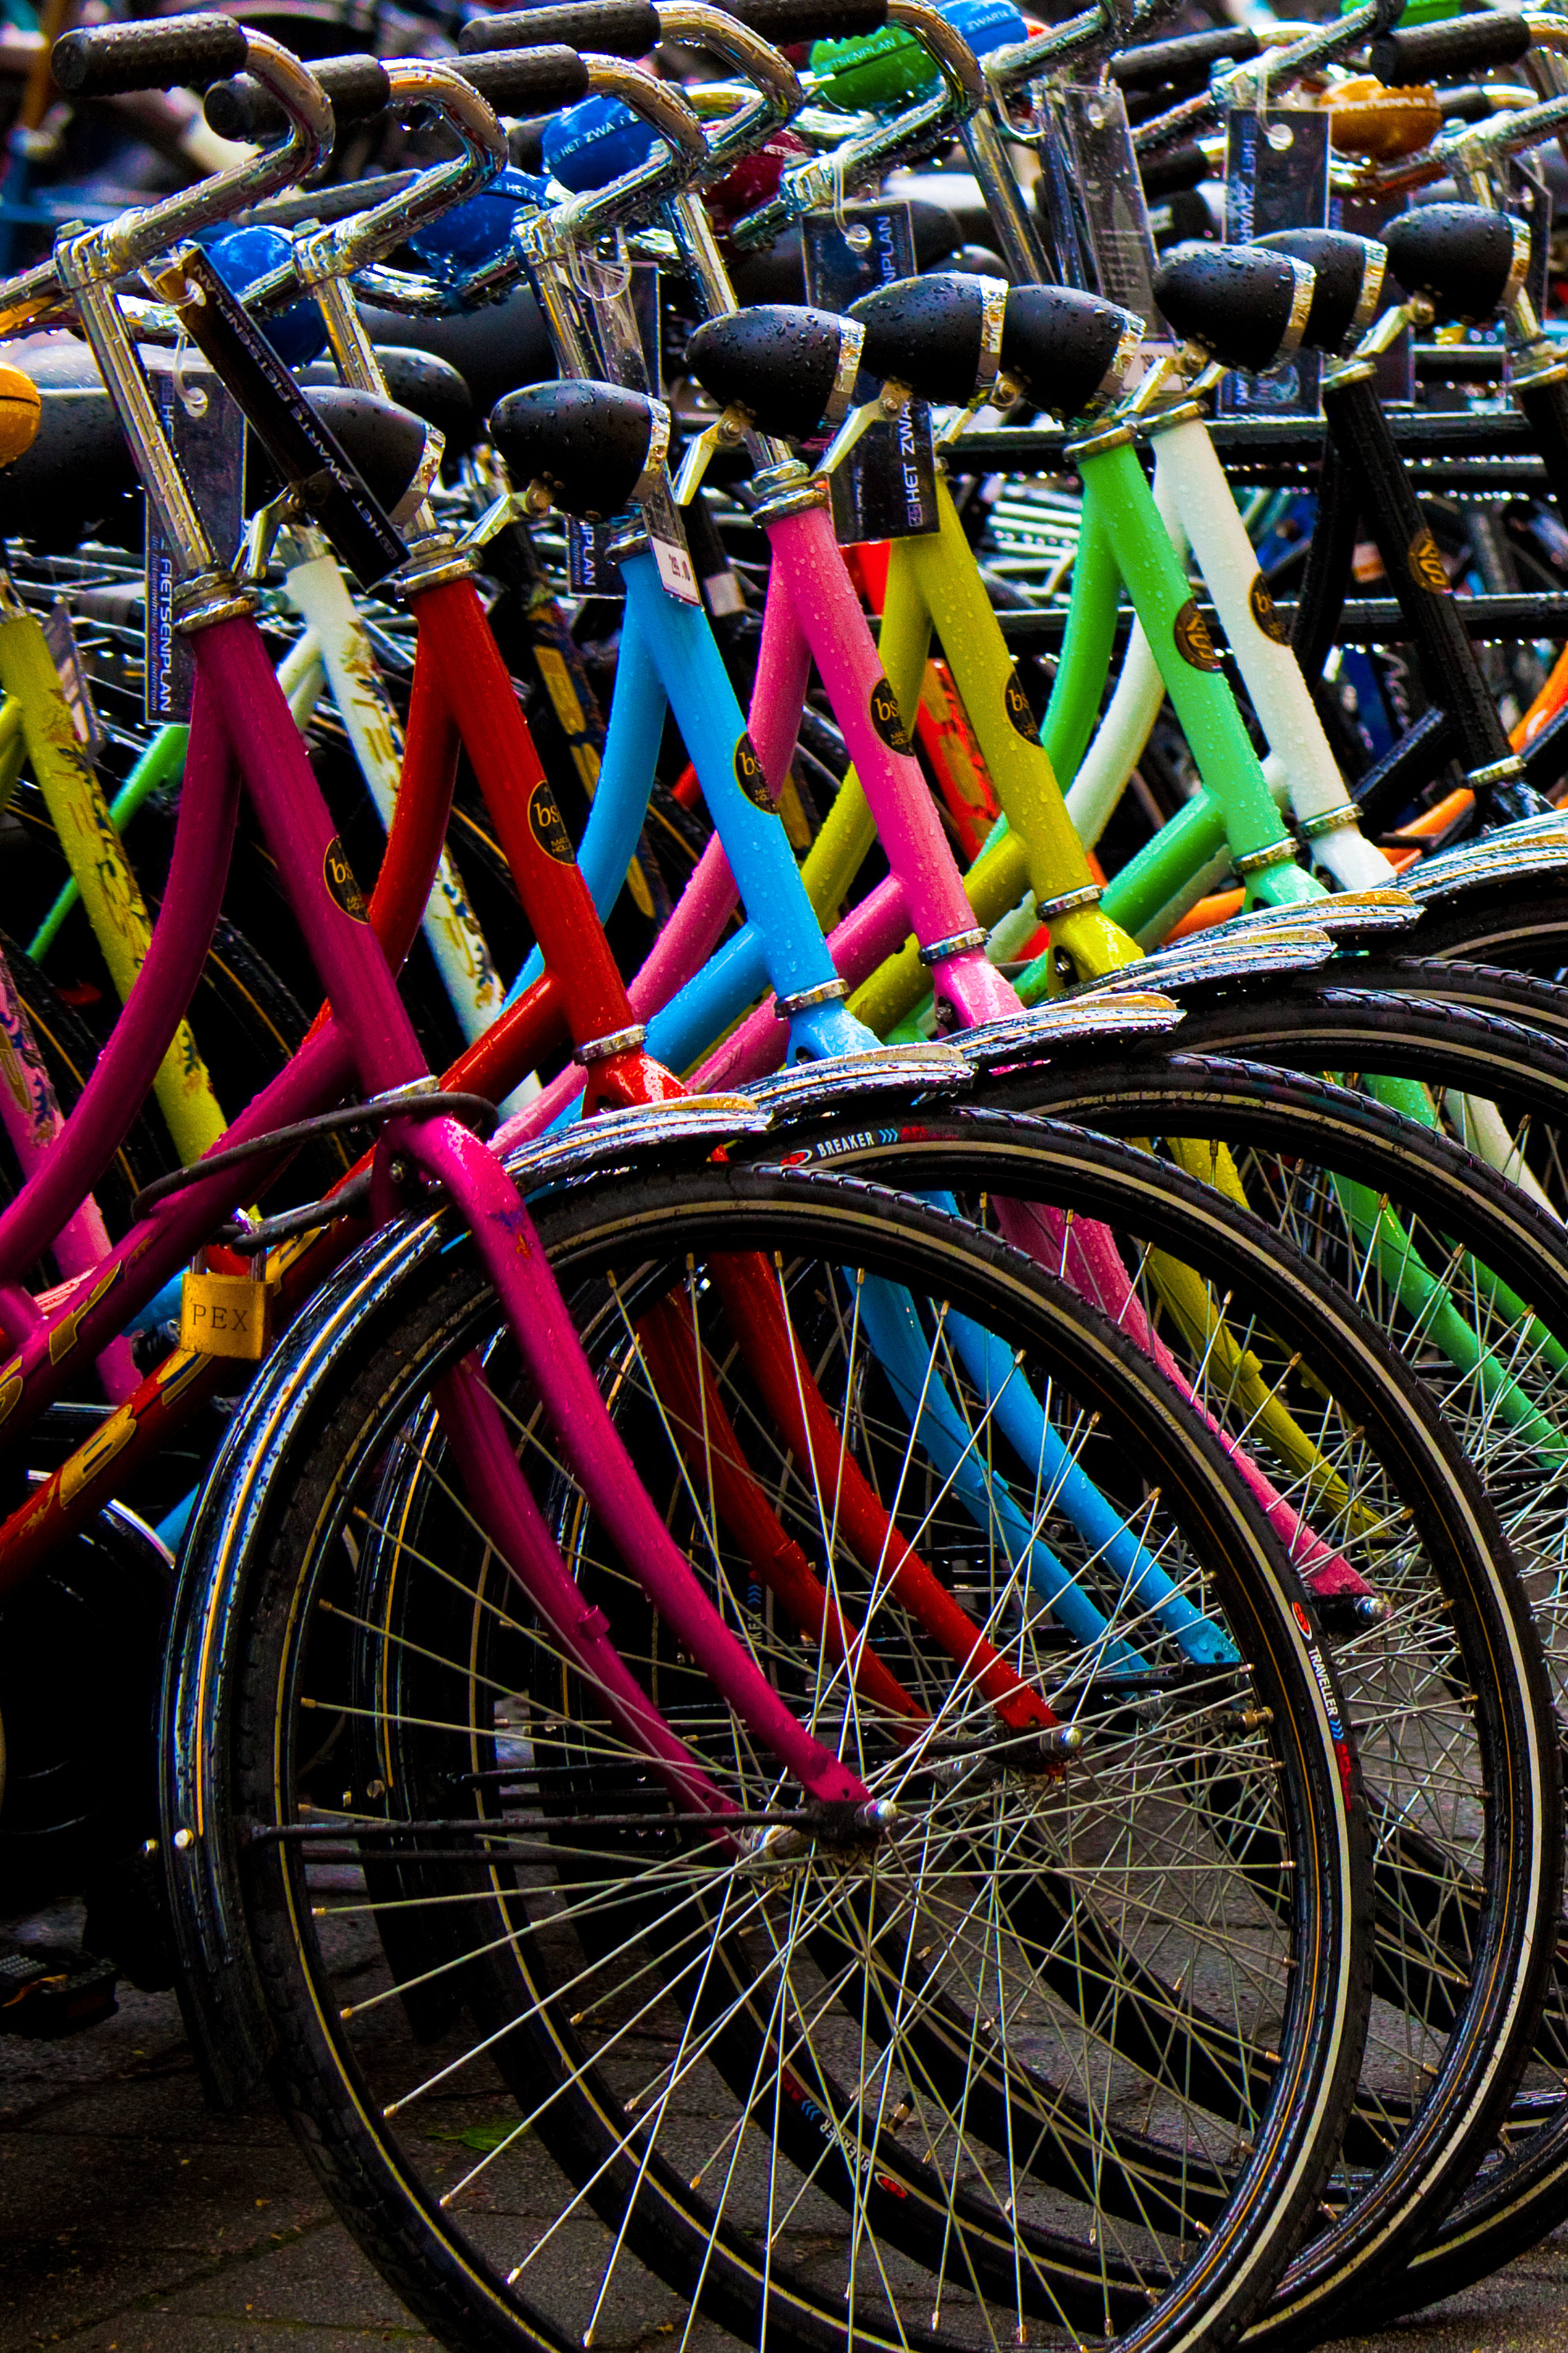 bicycles lined up.